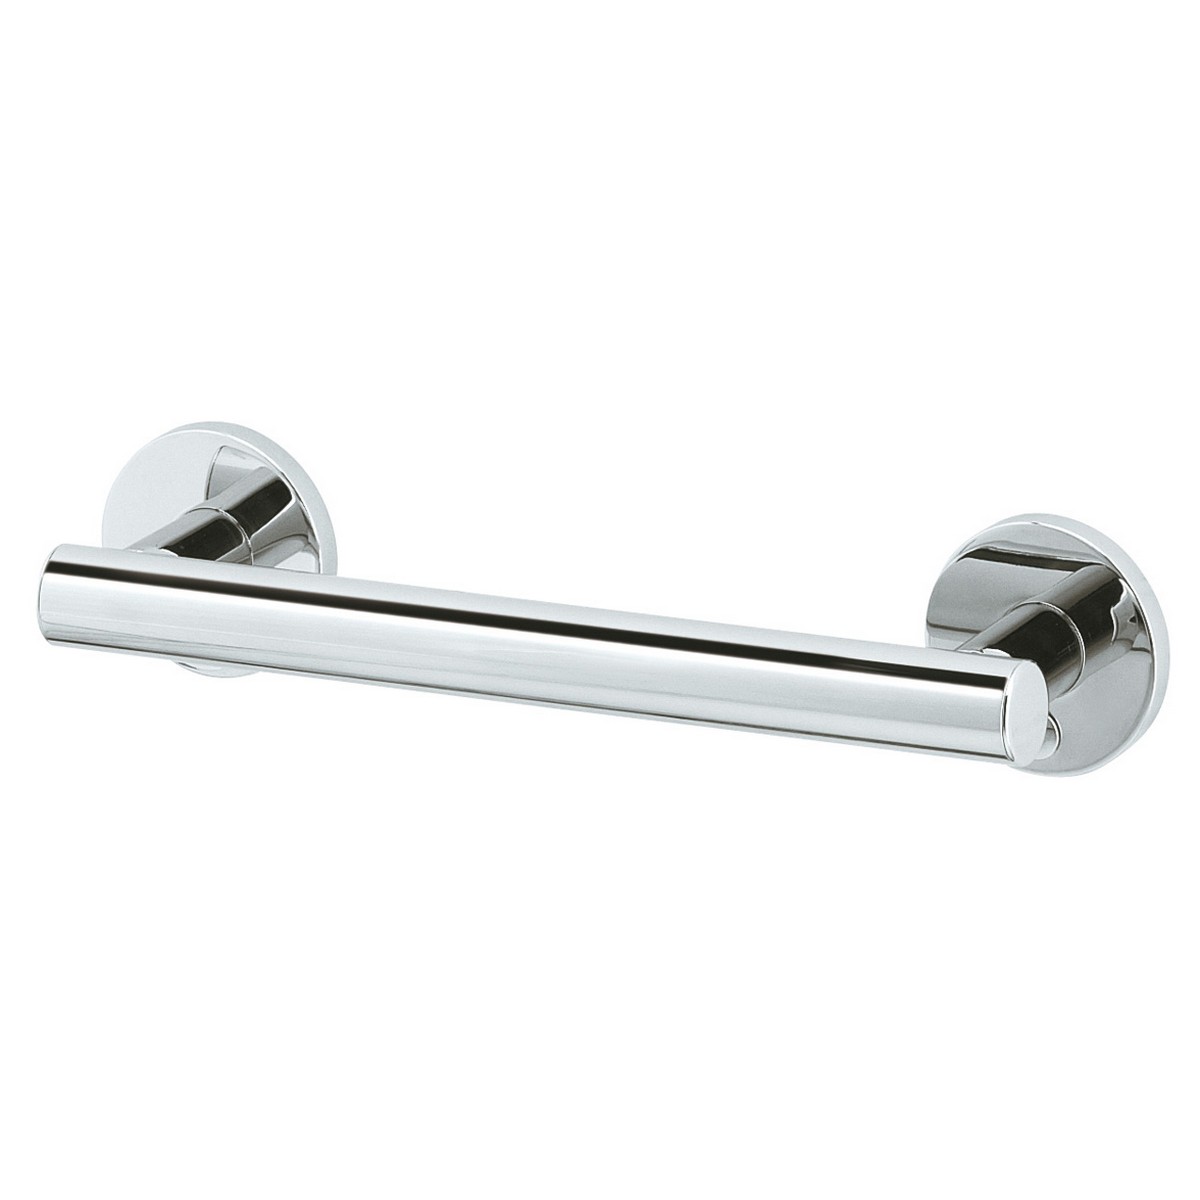 KEUCO 35901013200 PLAN CARE 32 INCH WALL MOUNTED SUPPORT RAIL IN POLISHED CHROME